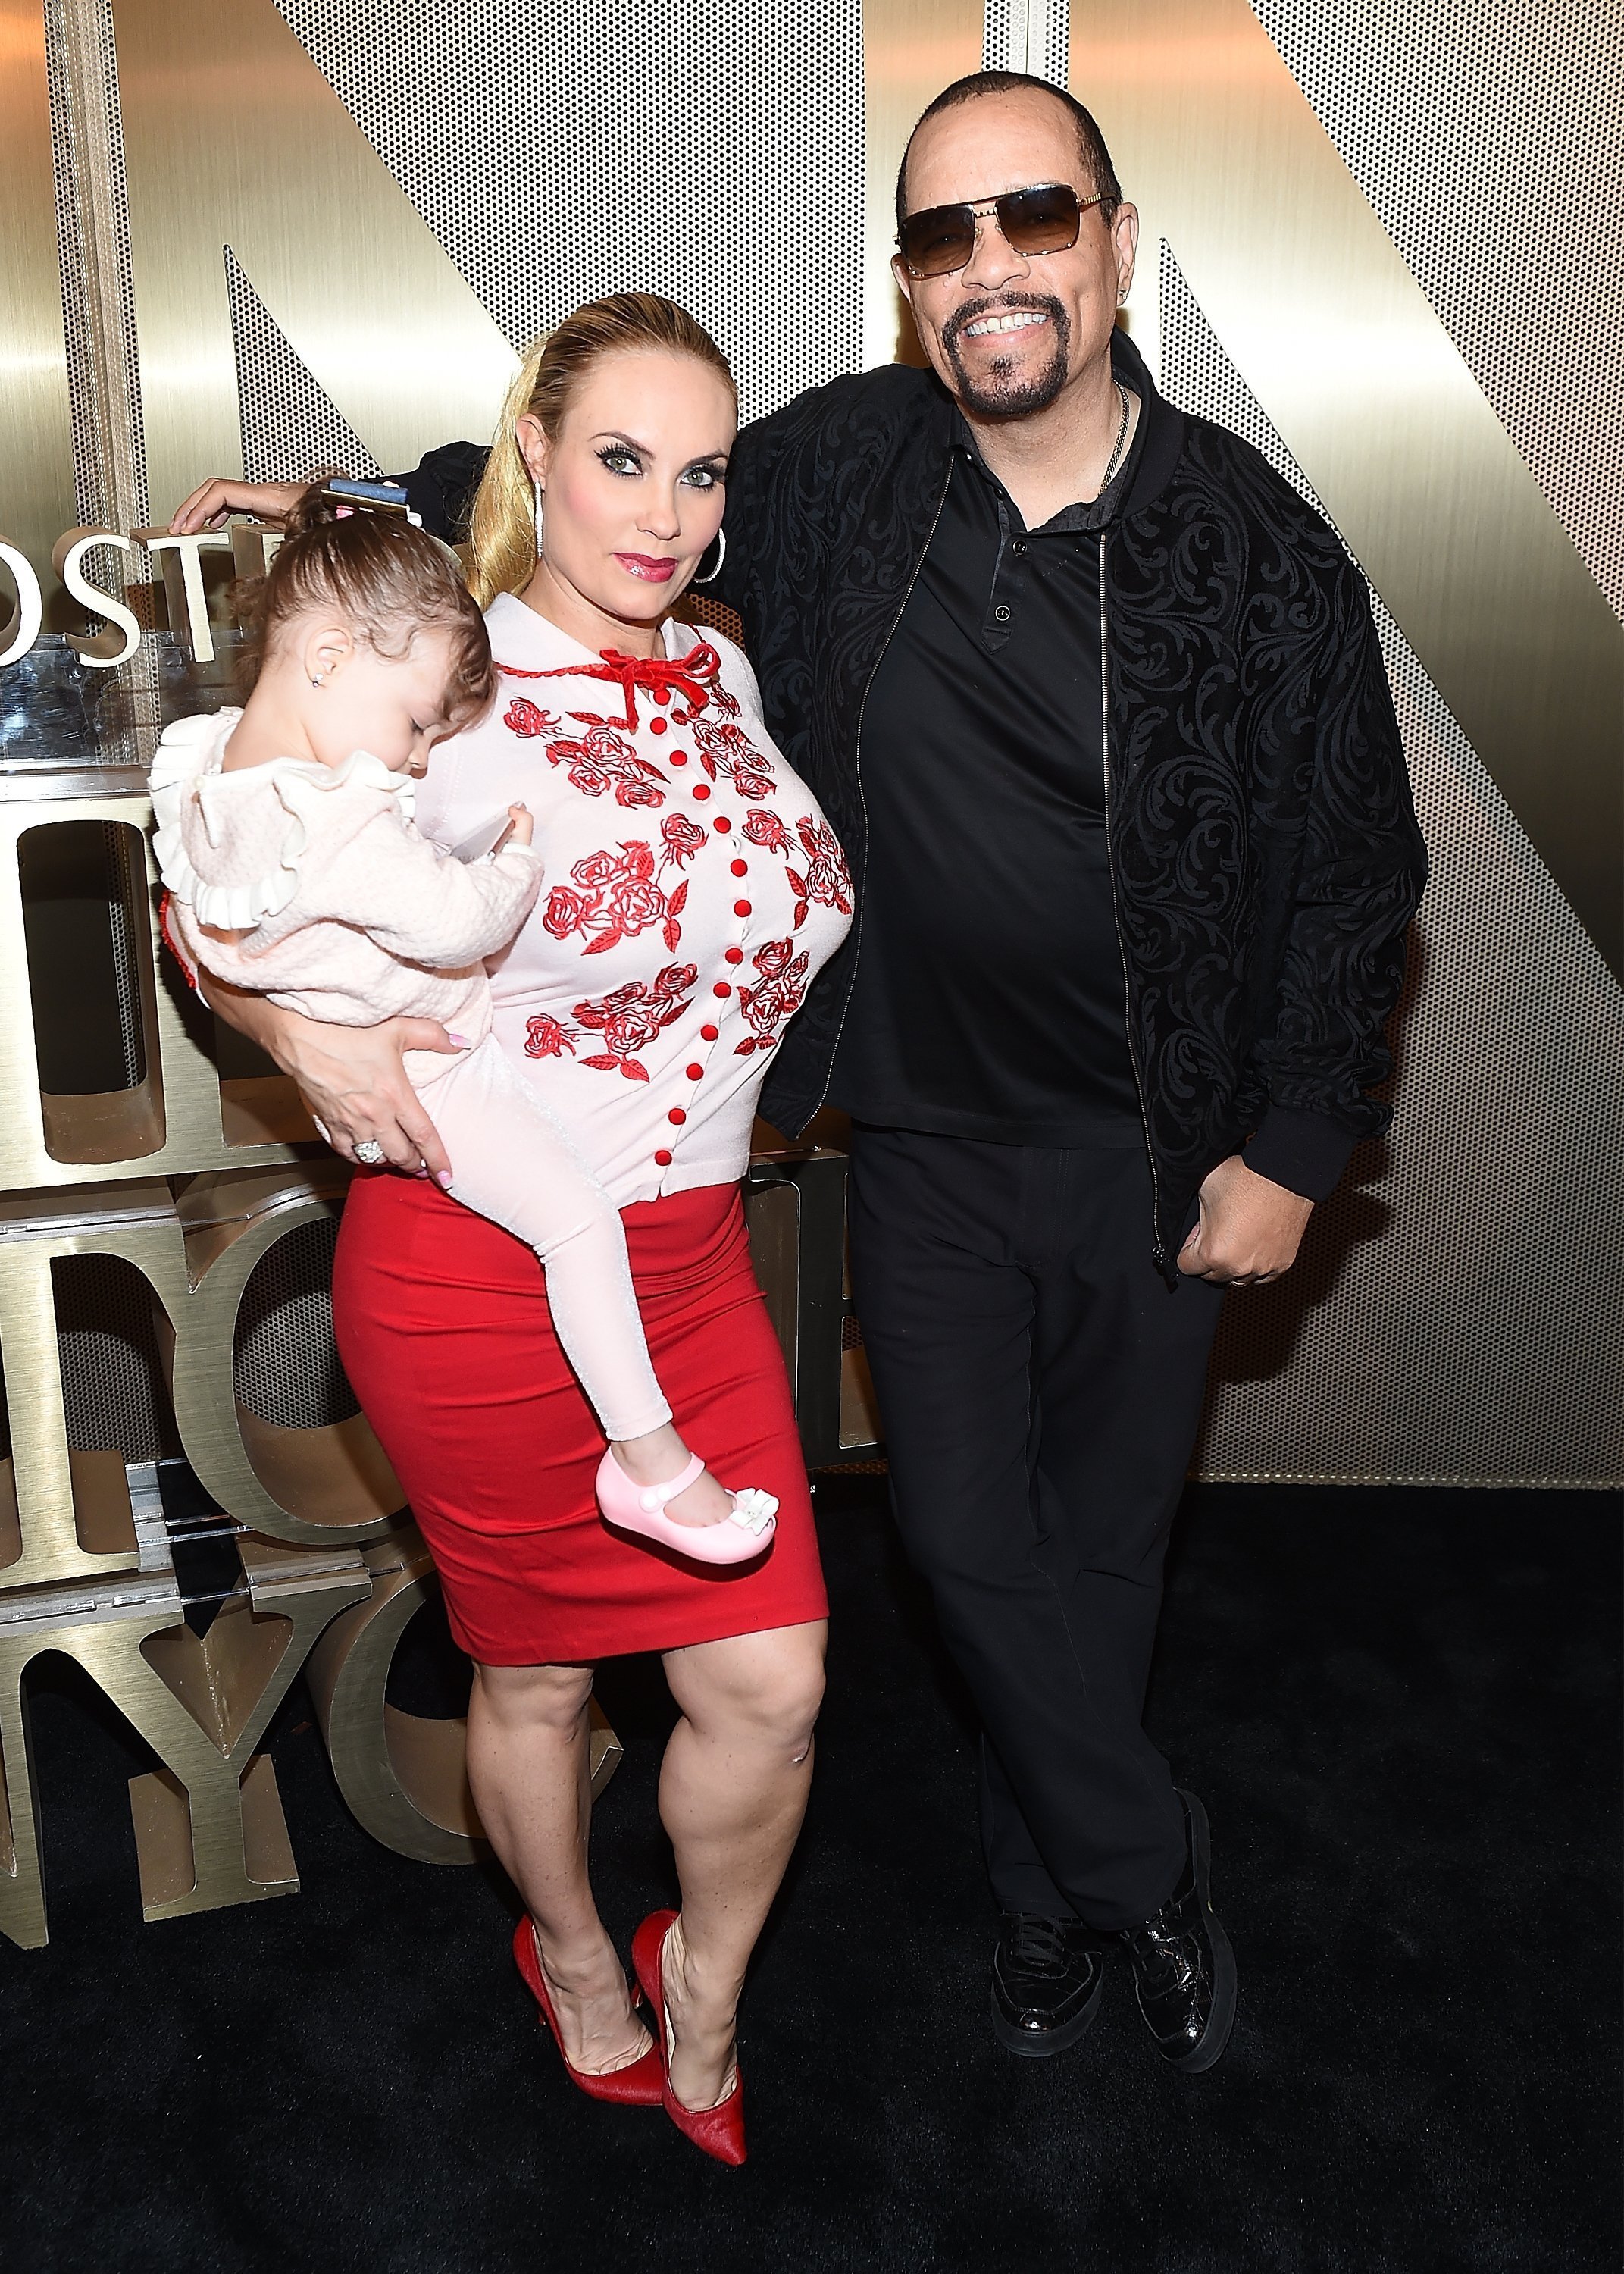 Coco Austin, Chanel, and Ice-T at the Nordstrom Men's NYC Store Opening on April 10, 2018 in New York City | Photo: Getty Images